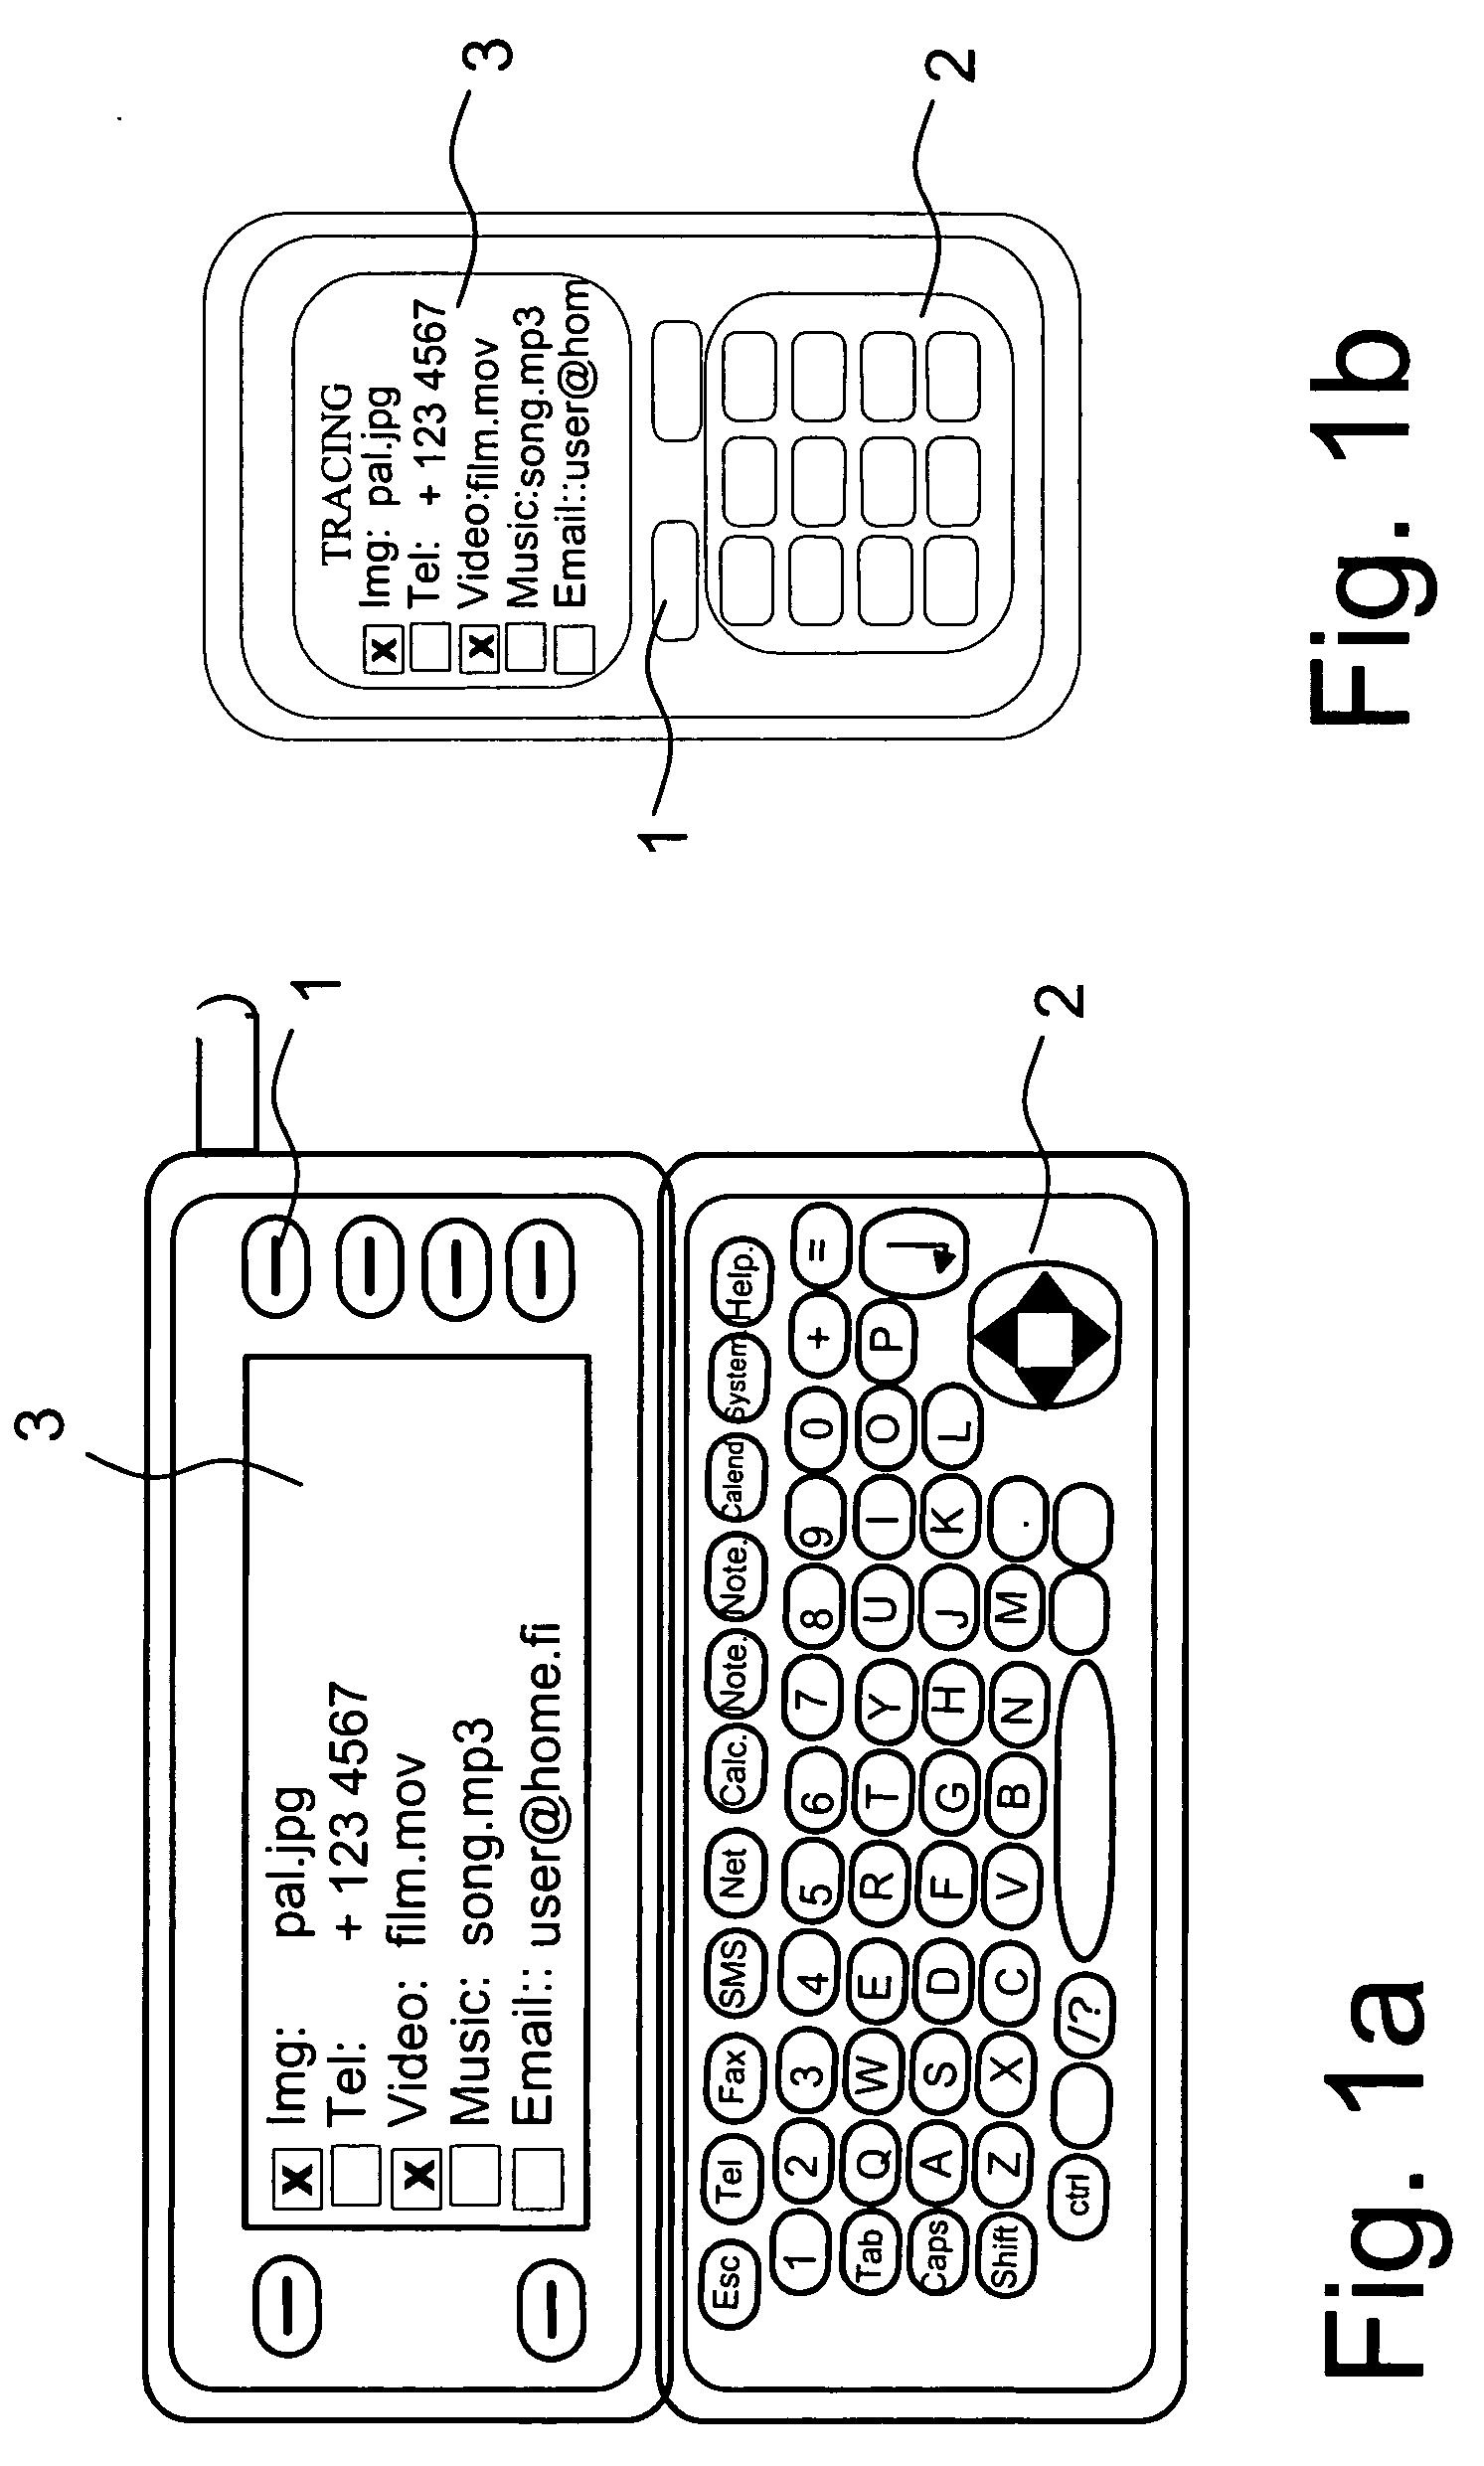 Method and system for centralized copy/paste functionality